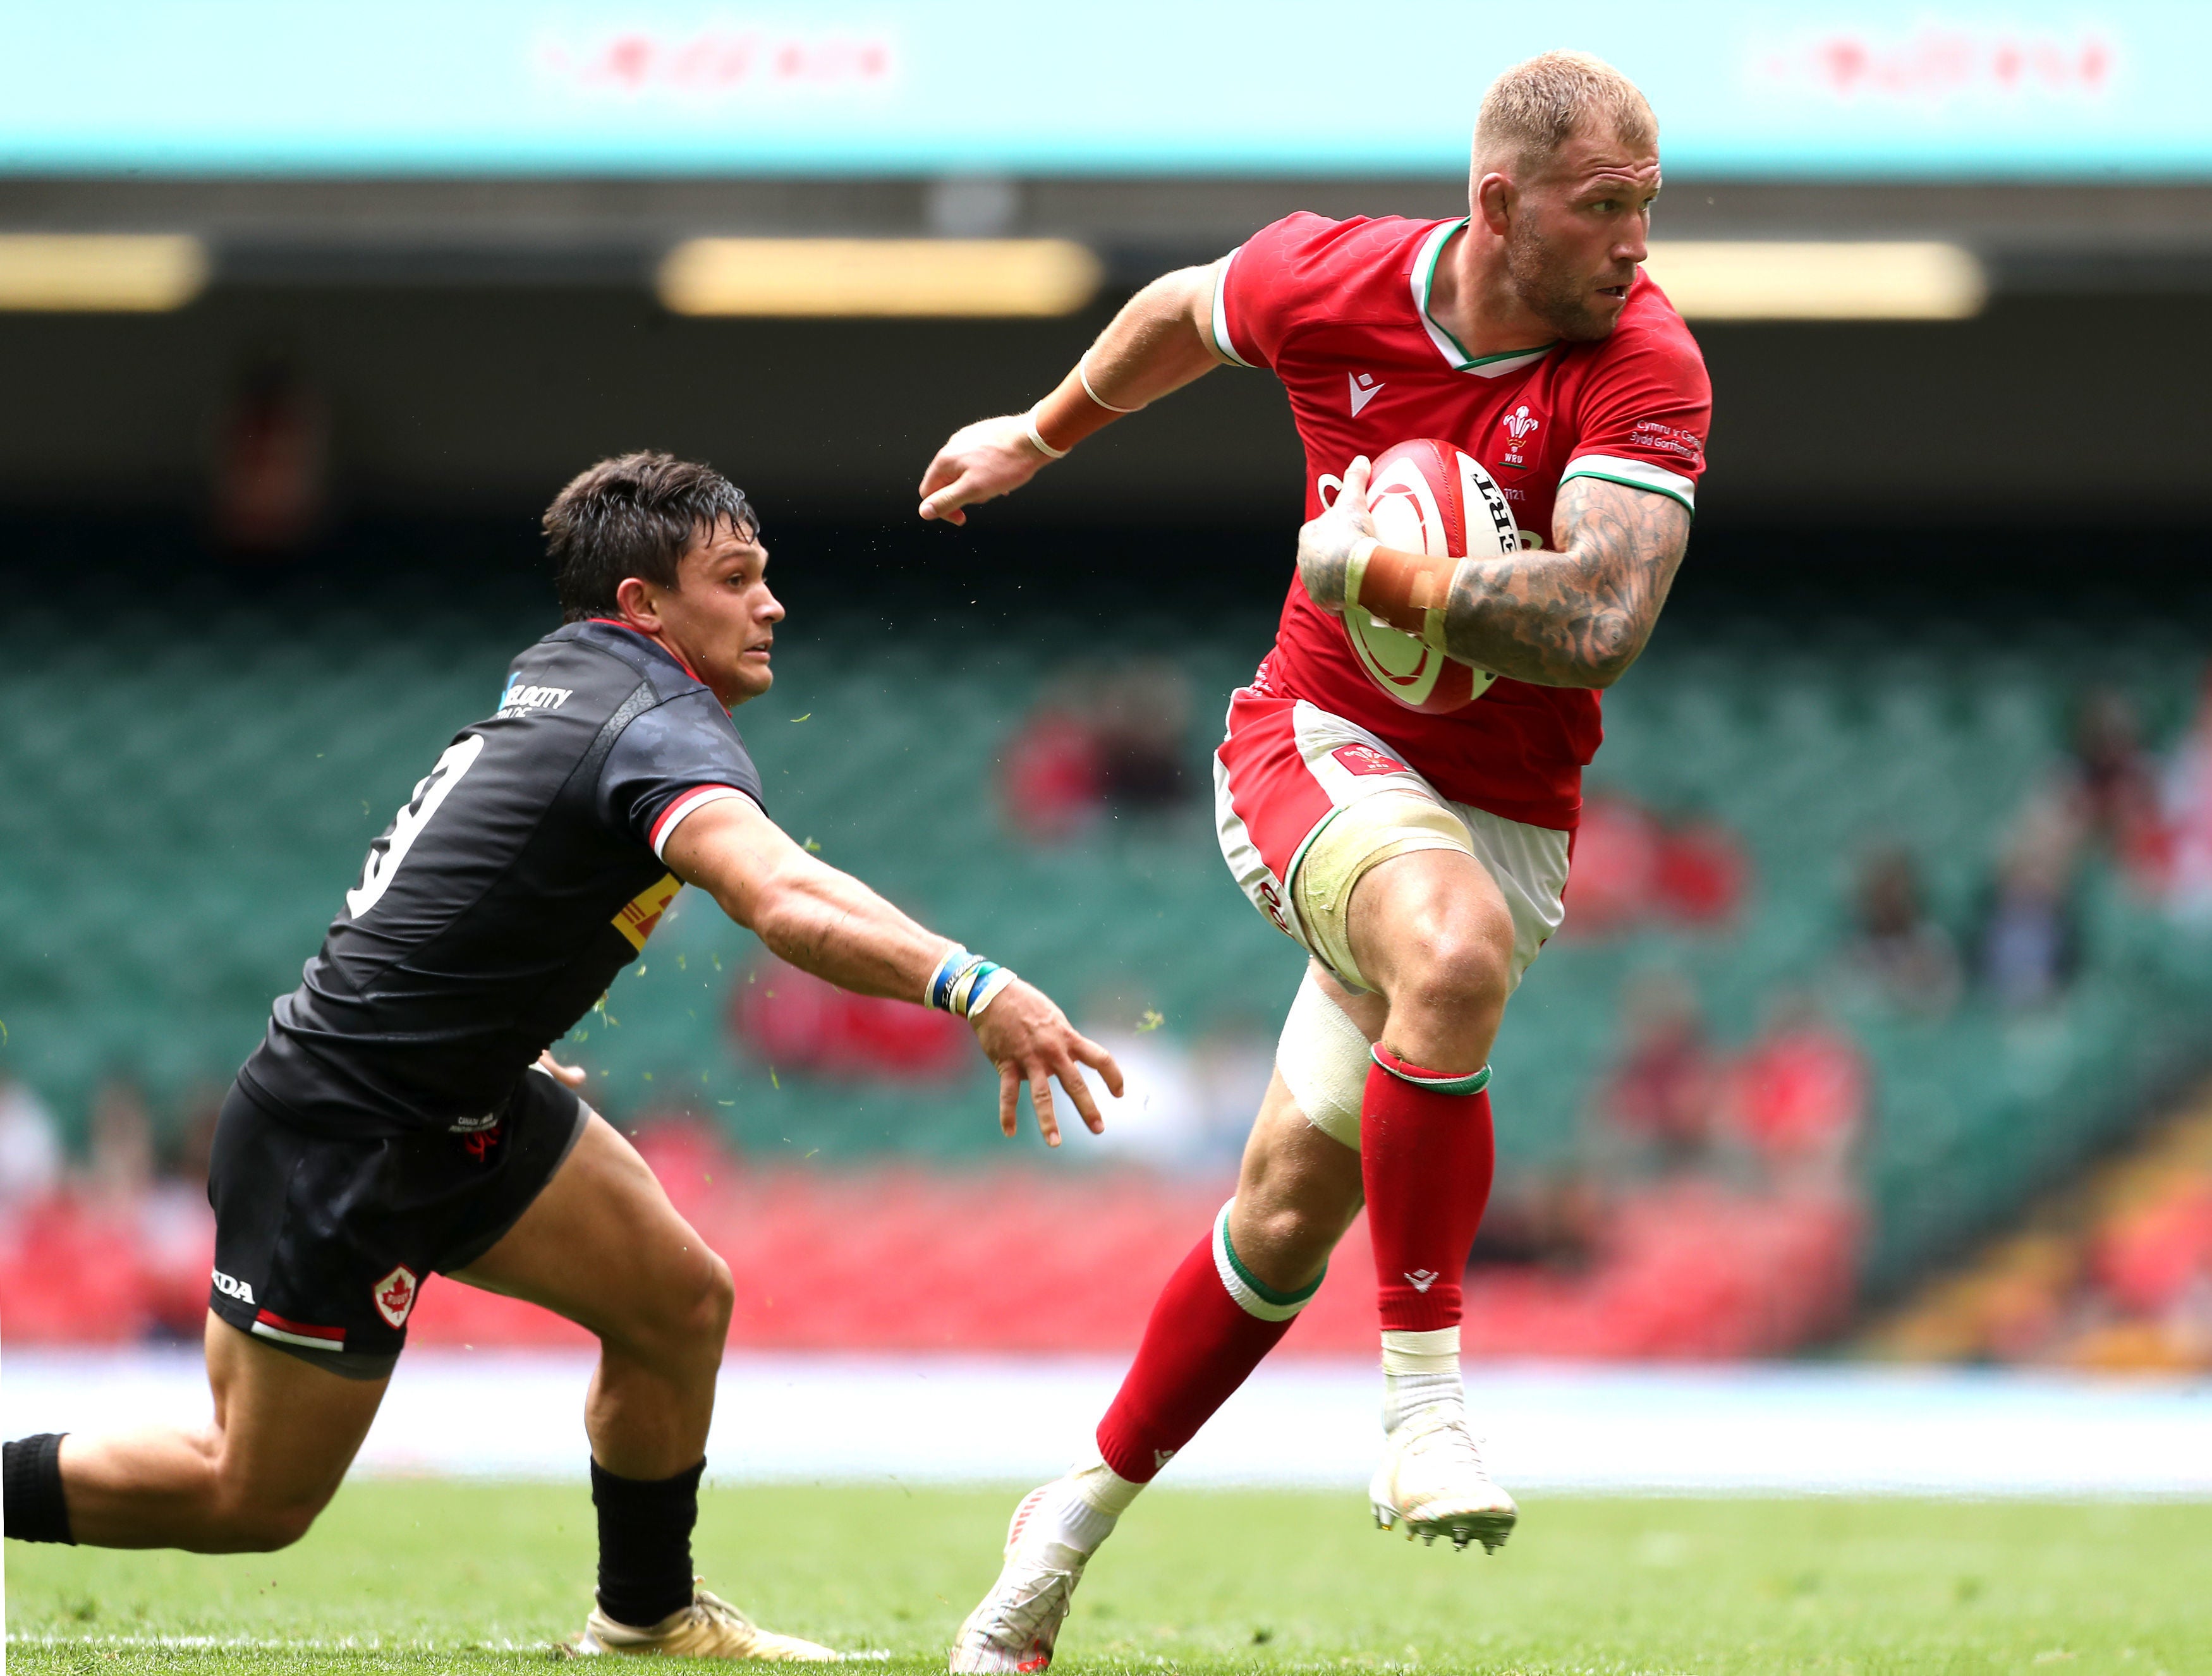 The Dragons forward has not played since Wales hosted New Zealand in October